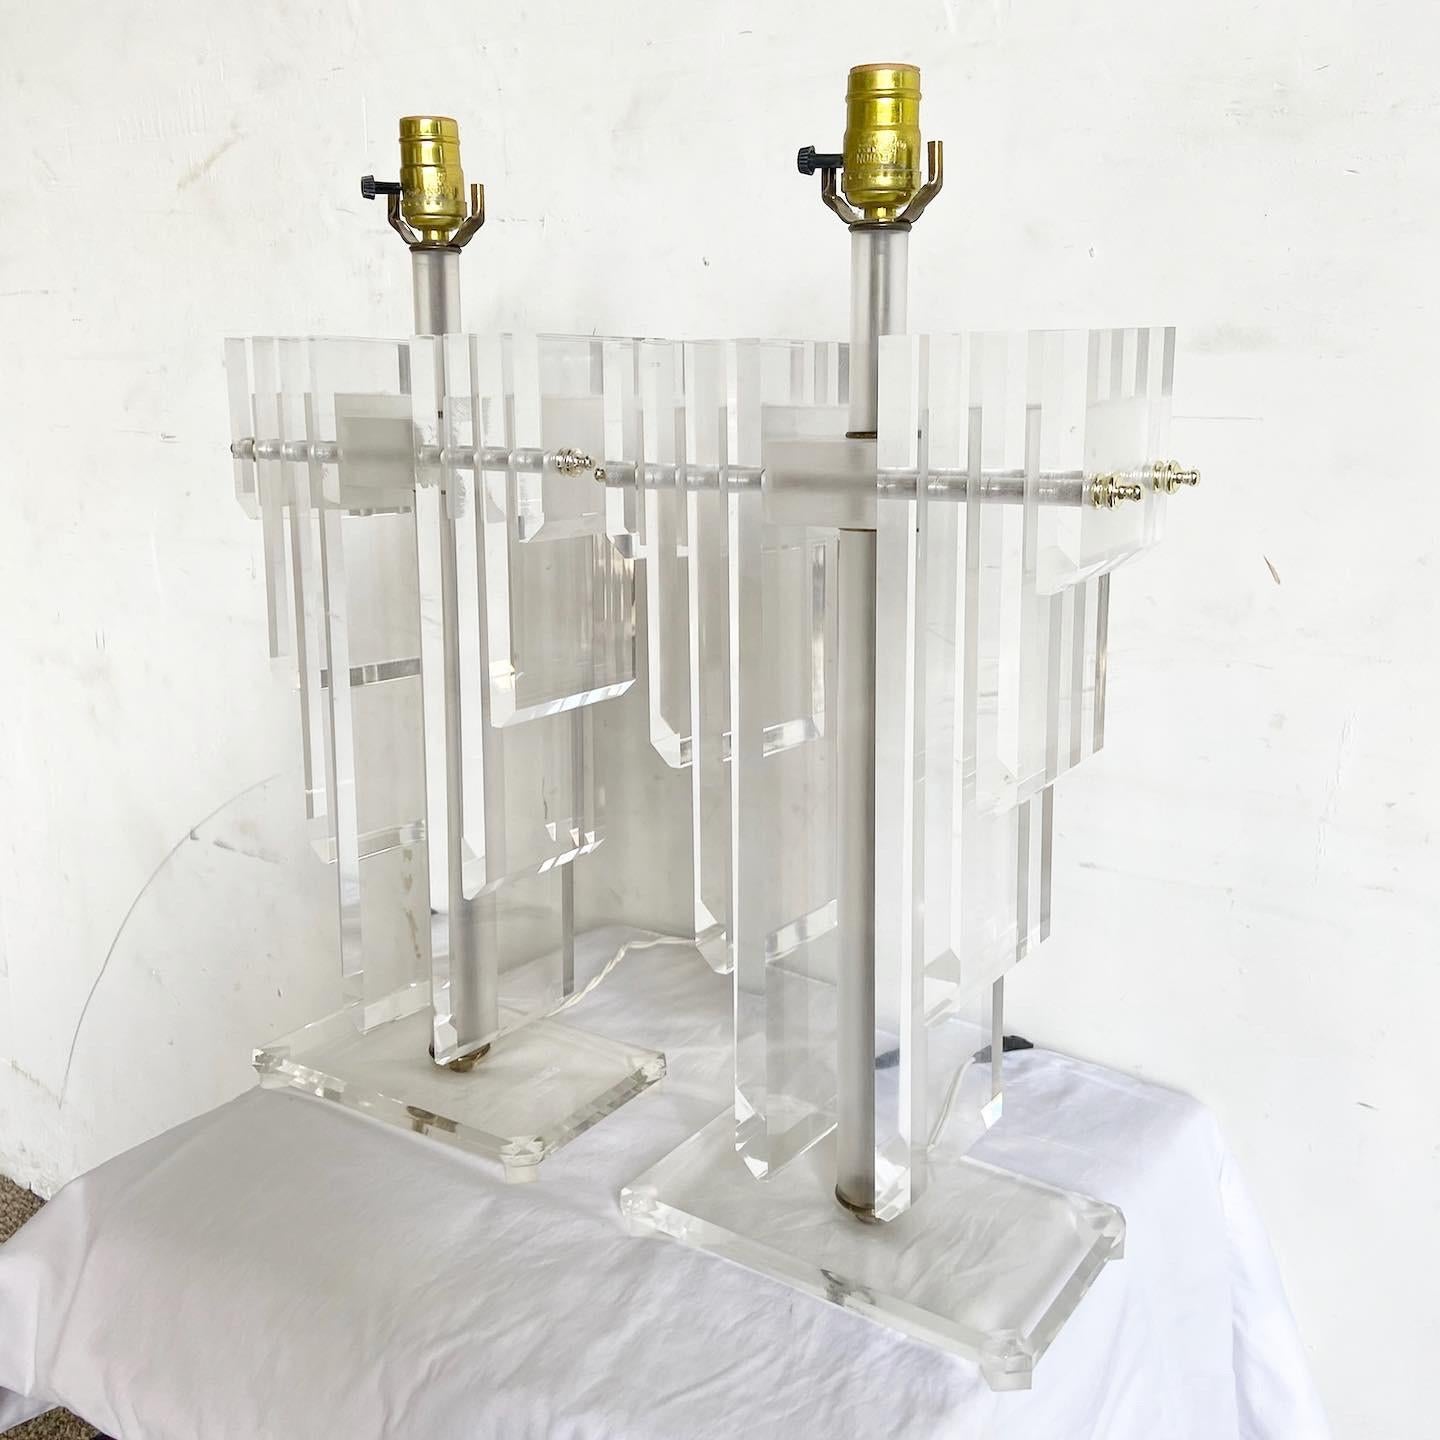 Step back in time with this pair of Art Deco Lucite Lamp Pair. Their unique design, reminiscent of angel wings, captures the essence of the Art Deco era. Assembled Lucite chunks create a mesmerizing play of light and reflection, making these lamps